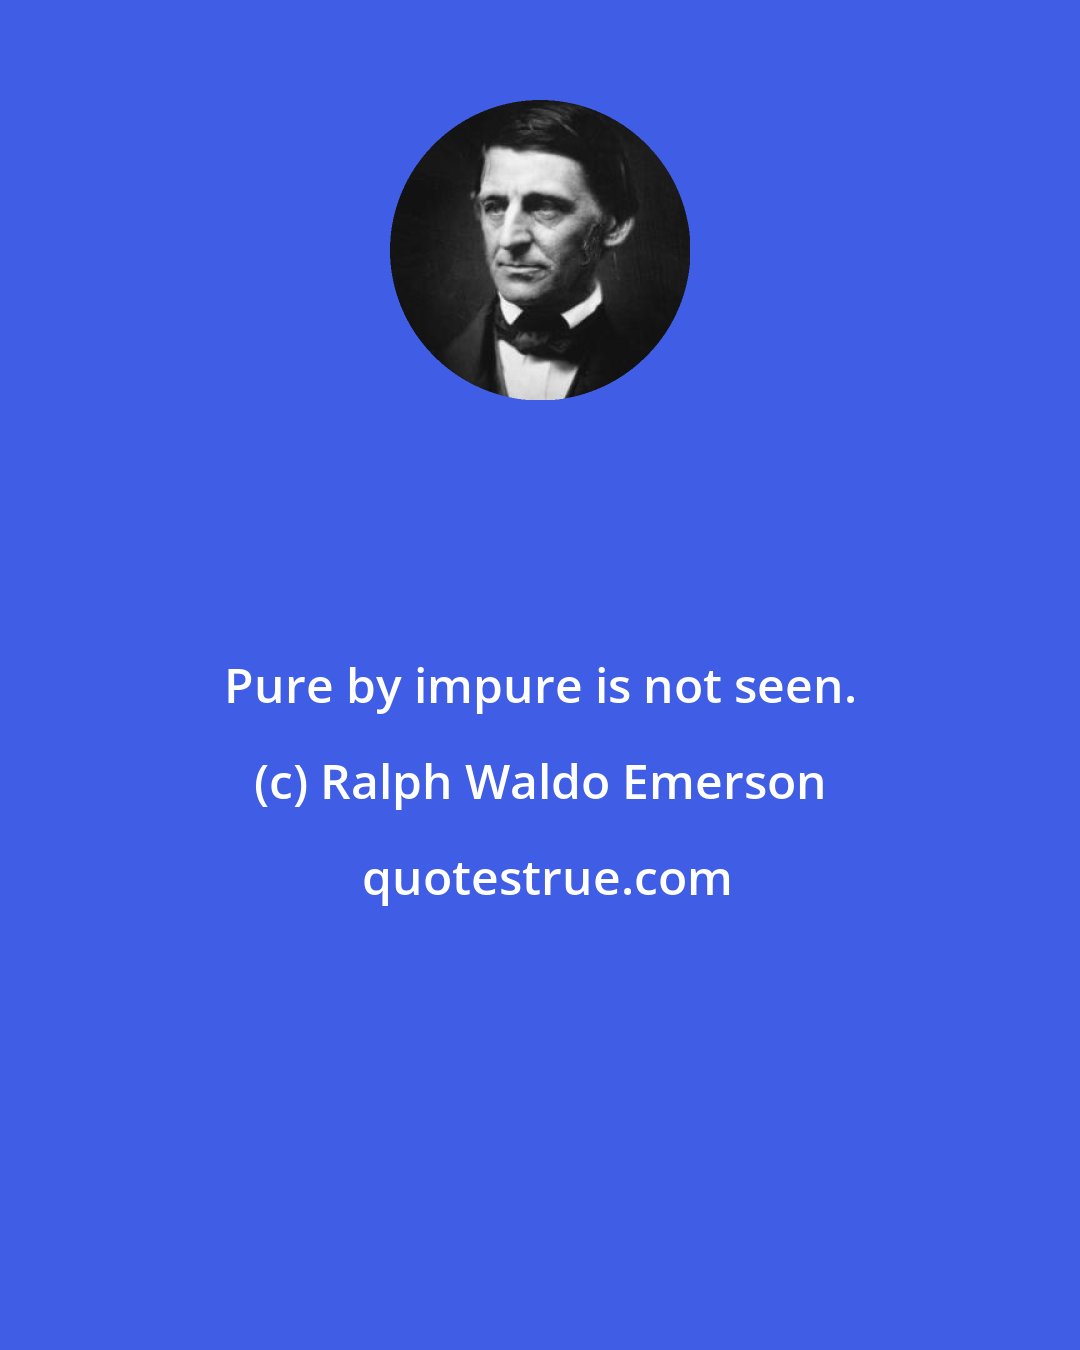 Ralph Waldo Emerson: Pure by impure is not seen.